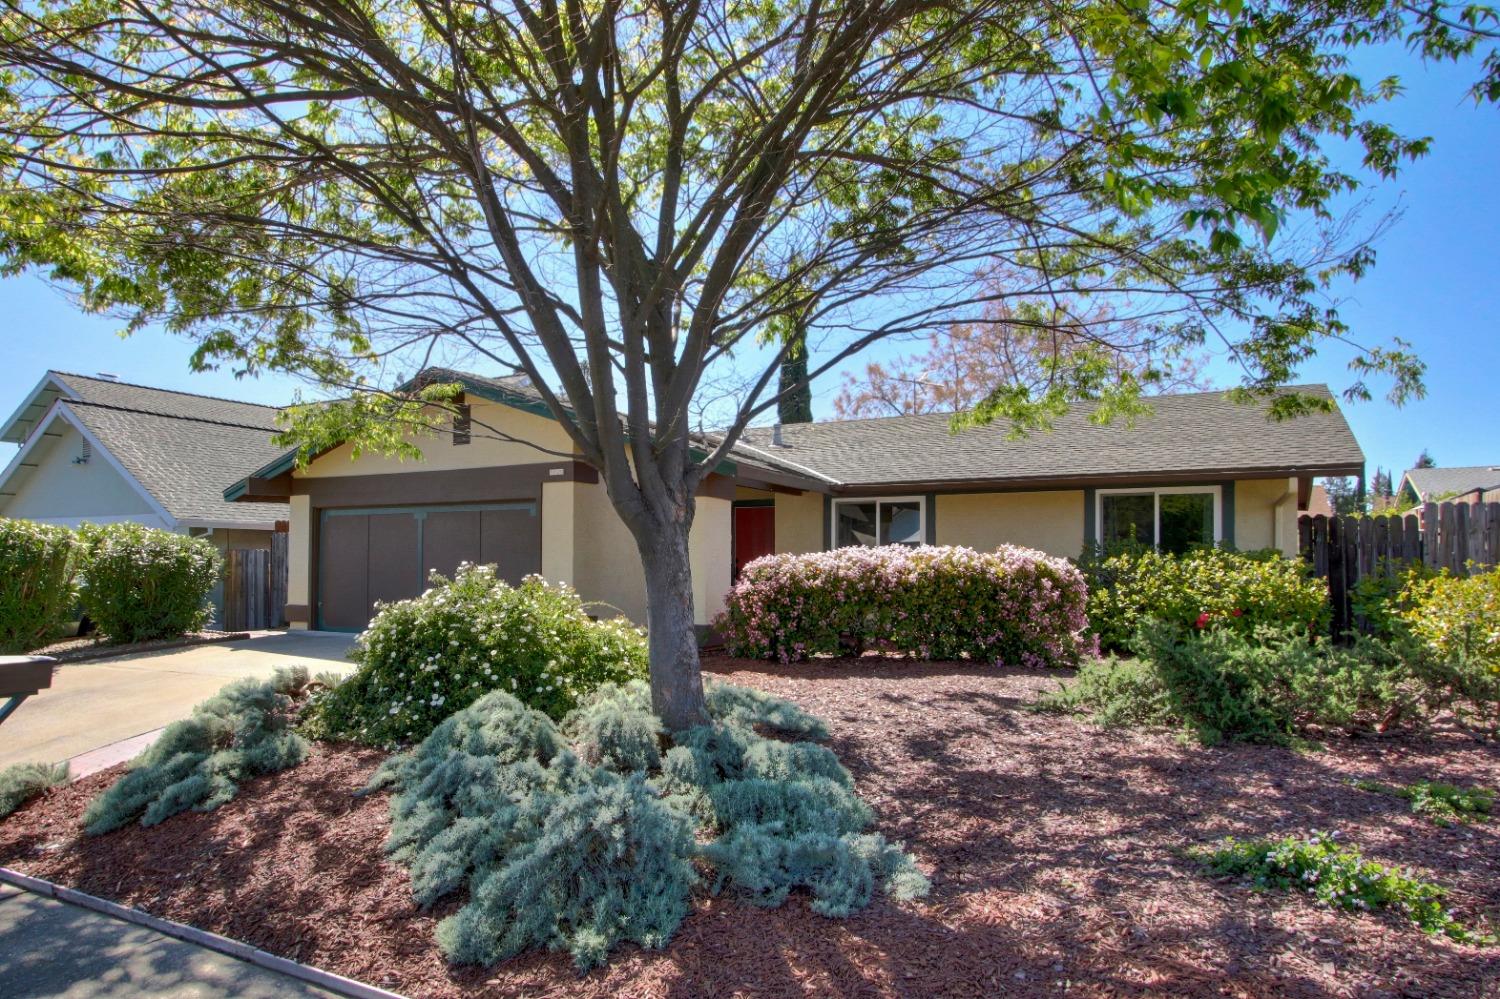 Photo of 5920 Trawler Wy in Citrus Heights, CA